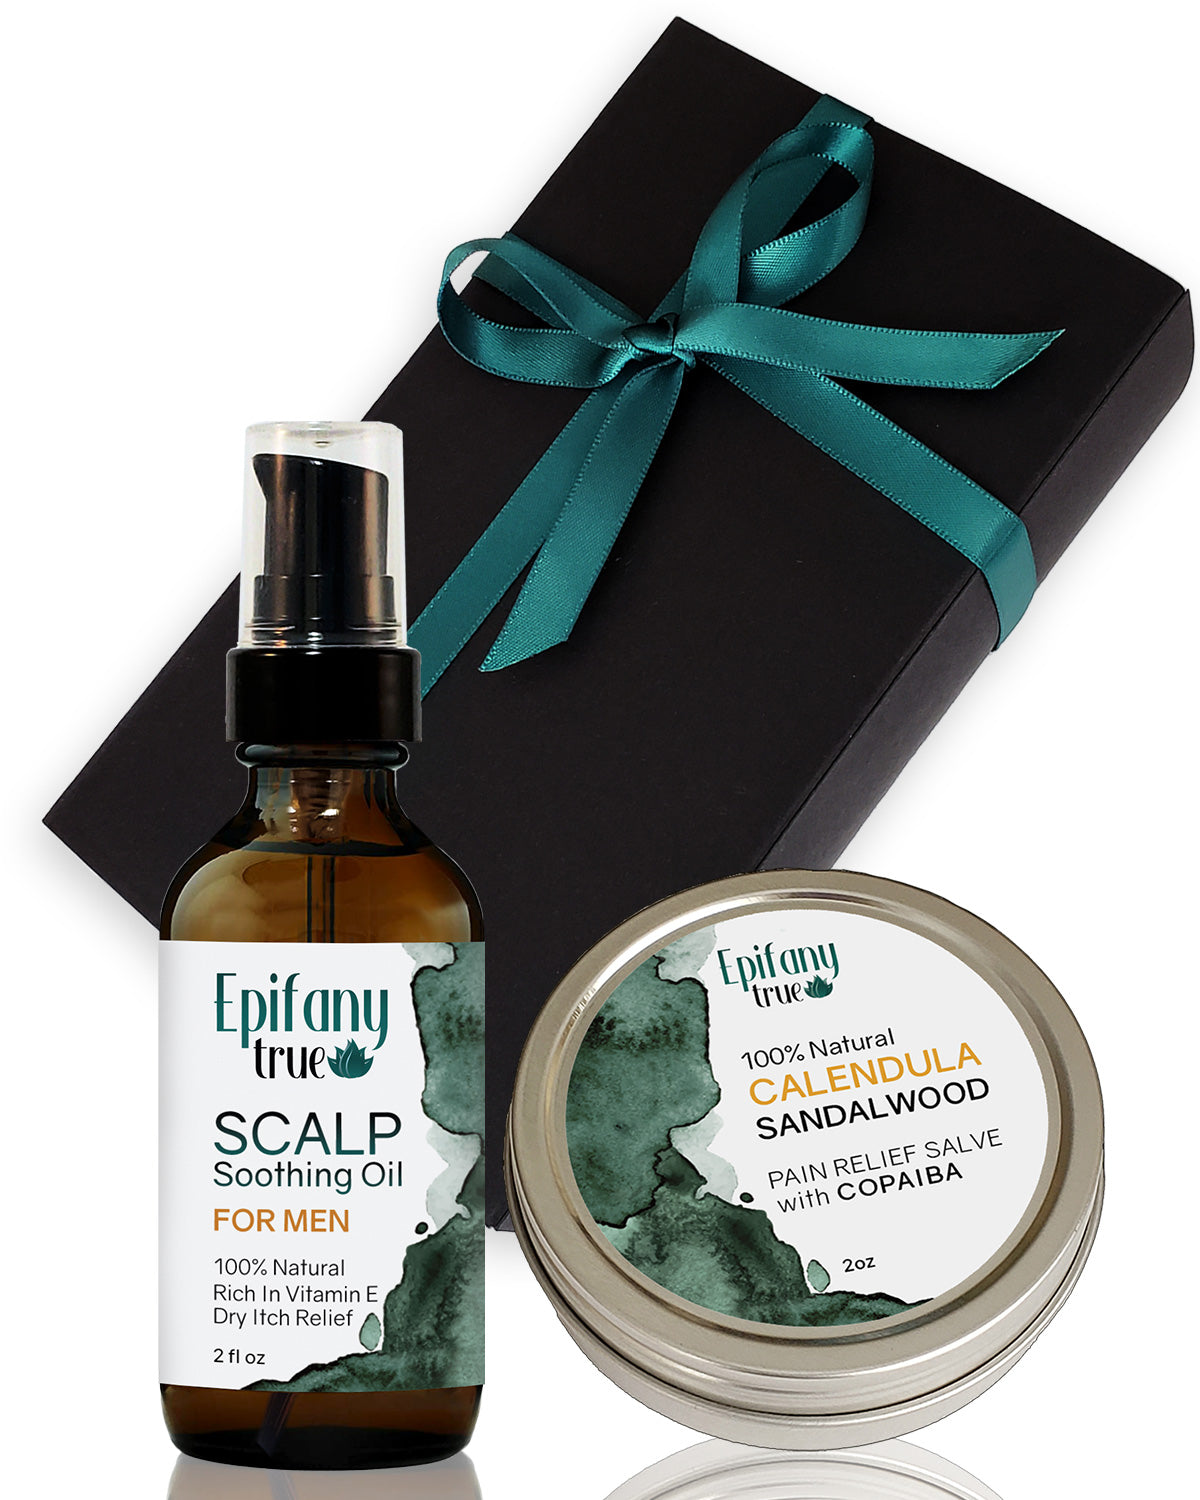 Scalp Soothing Oil 2oz and Calendula & Sandalwood Pain Relief Salve with Copaiba 2oz Bundle